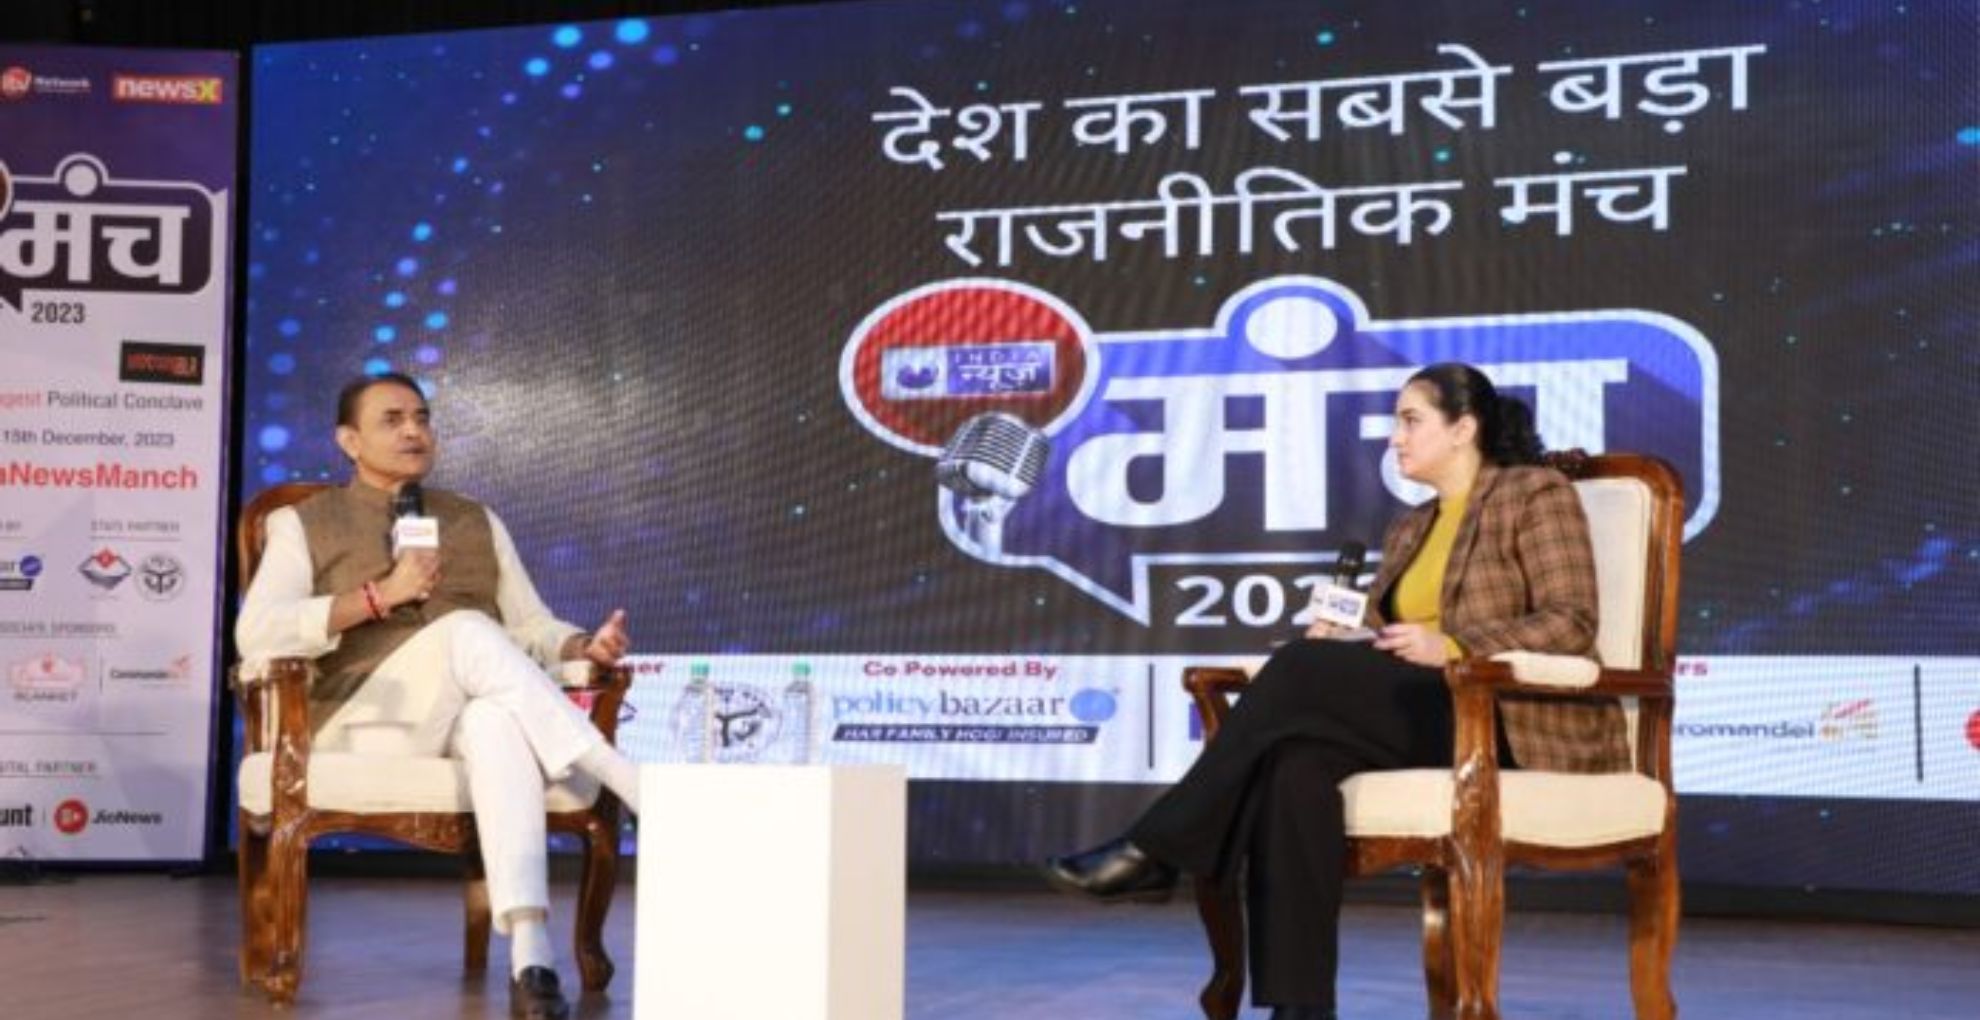 India News Manch 2023: Praful Patel takes a dig at the Congress, saying the country’s oldest party has lost its direction